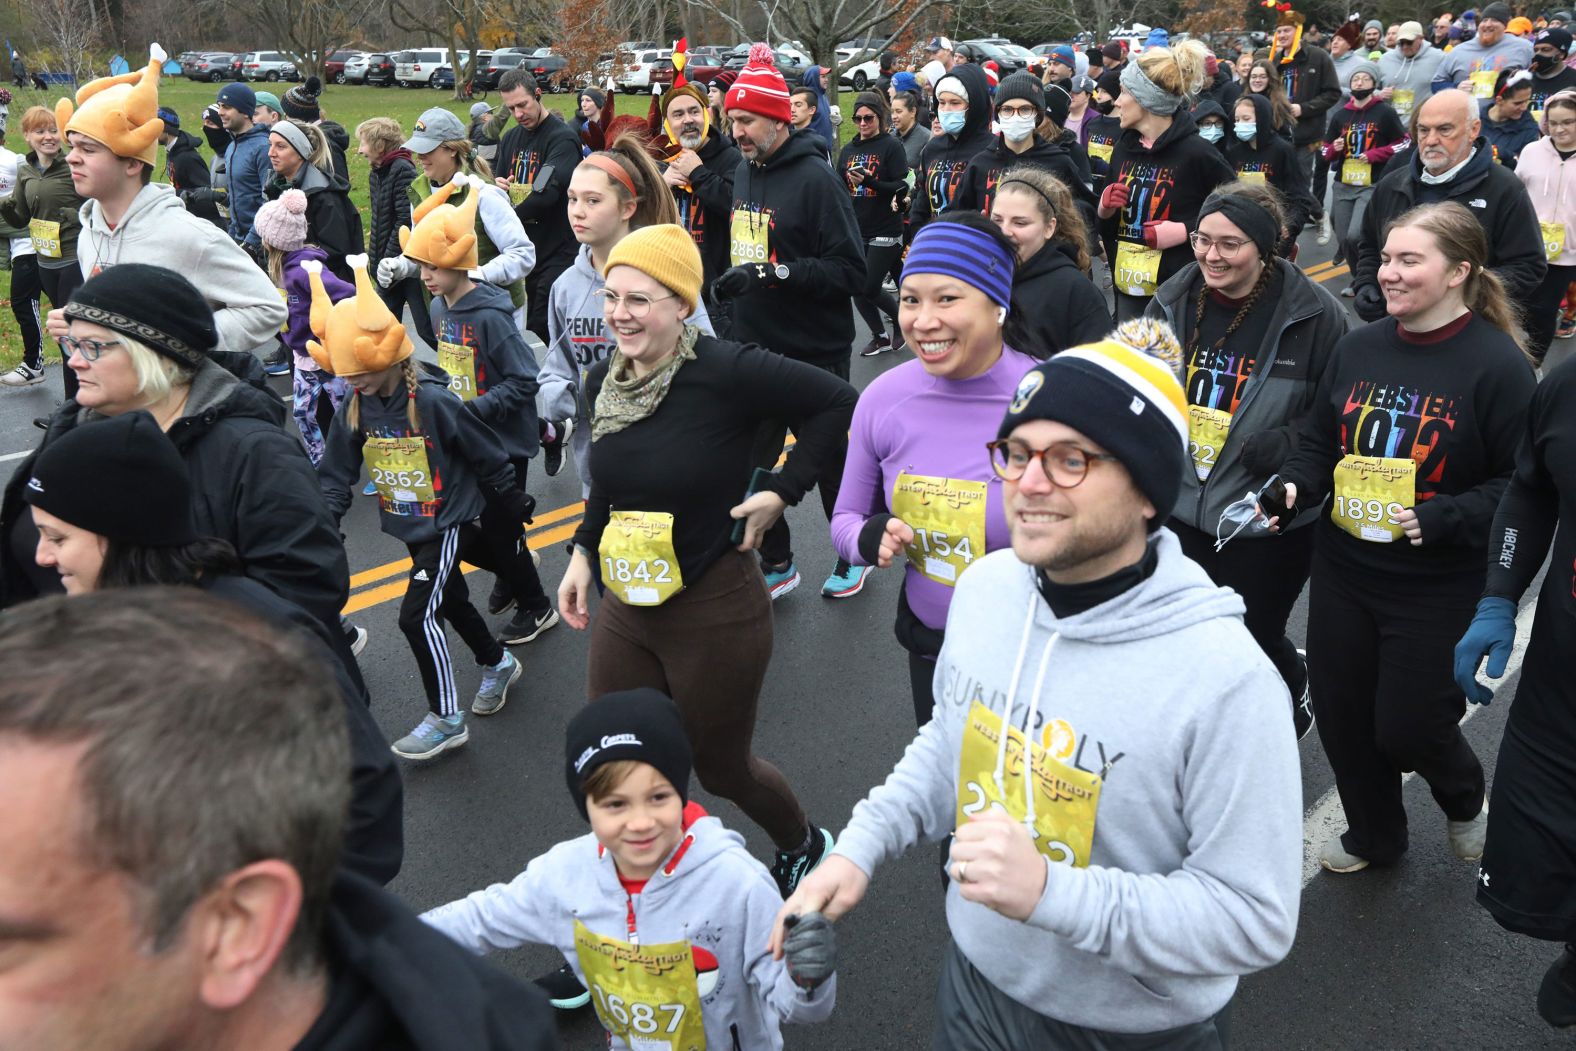 Runners take off at the start of a 2.5-mile race as they participate in the 50th annual Webster Turkey Trot in Webster, New York, on Thanksgiving Day.